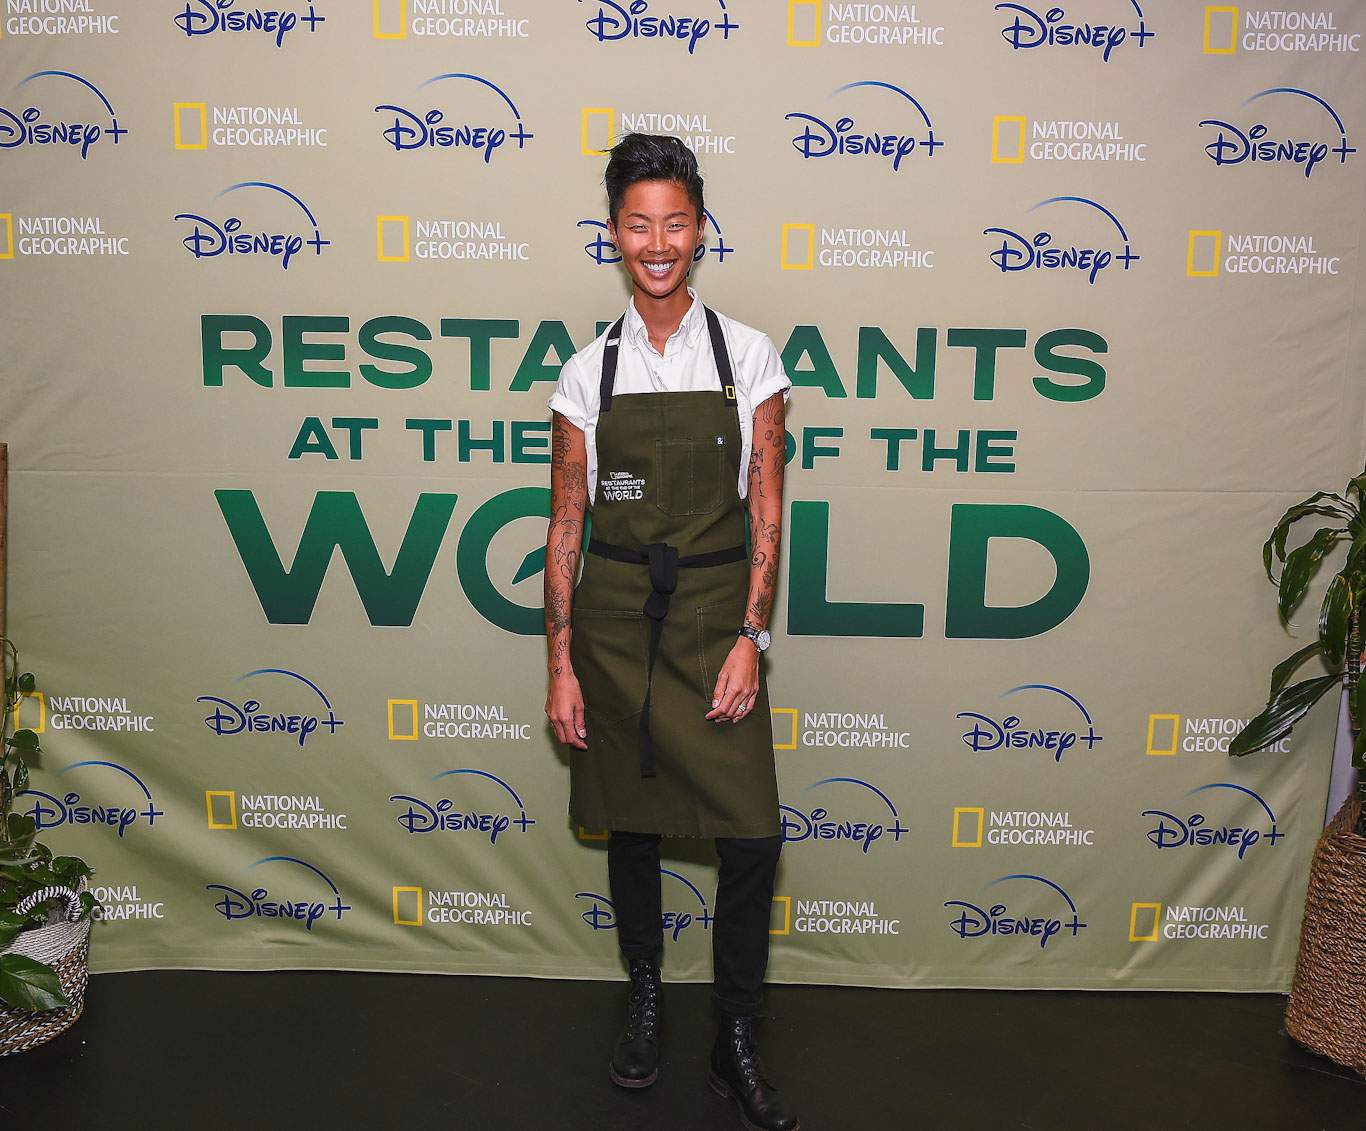 3/14/23: National Geographic 2023 SXSW “Restaurants at the End of the World” Dinner